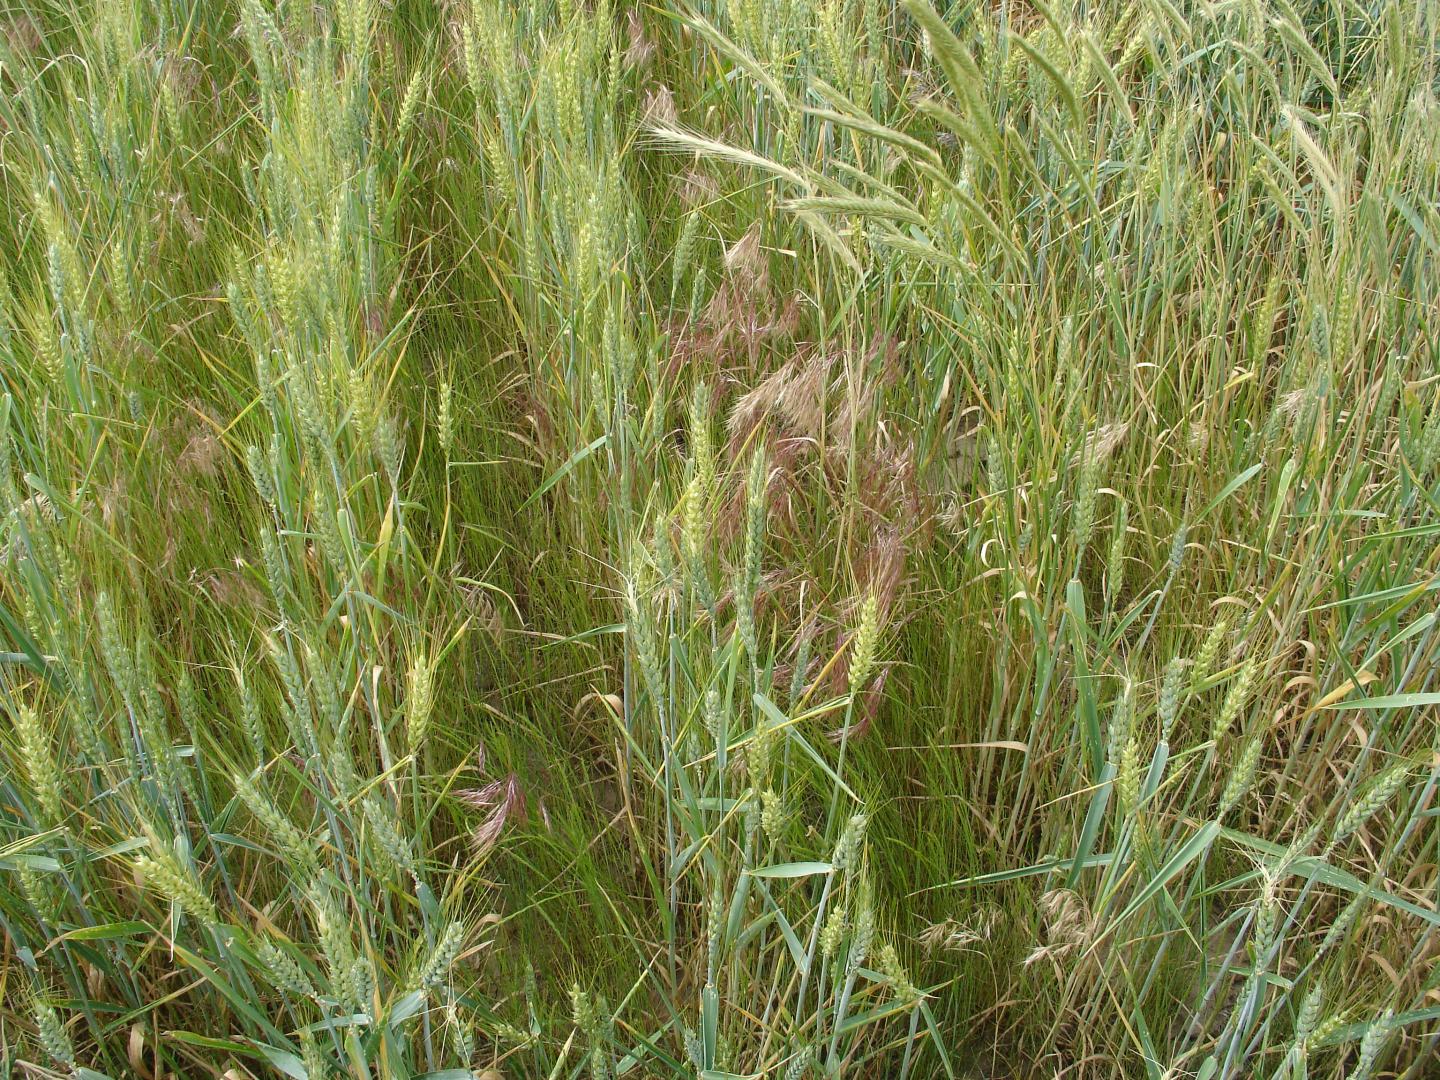 Feral rye (Secale cereale), rattail fescue (Vulpia myuros), and downy brome (Bromus tectorum)